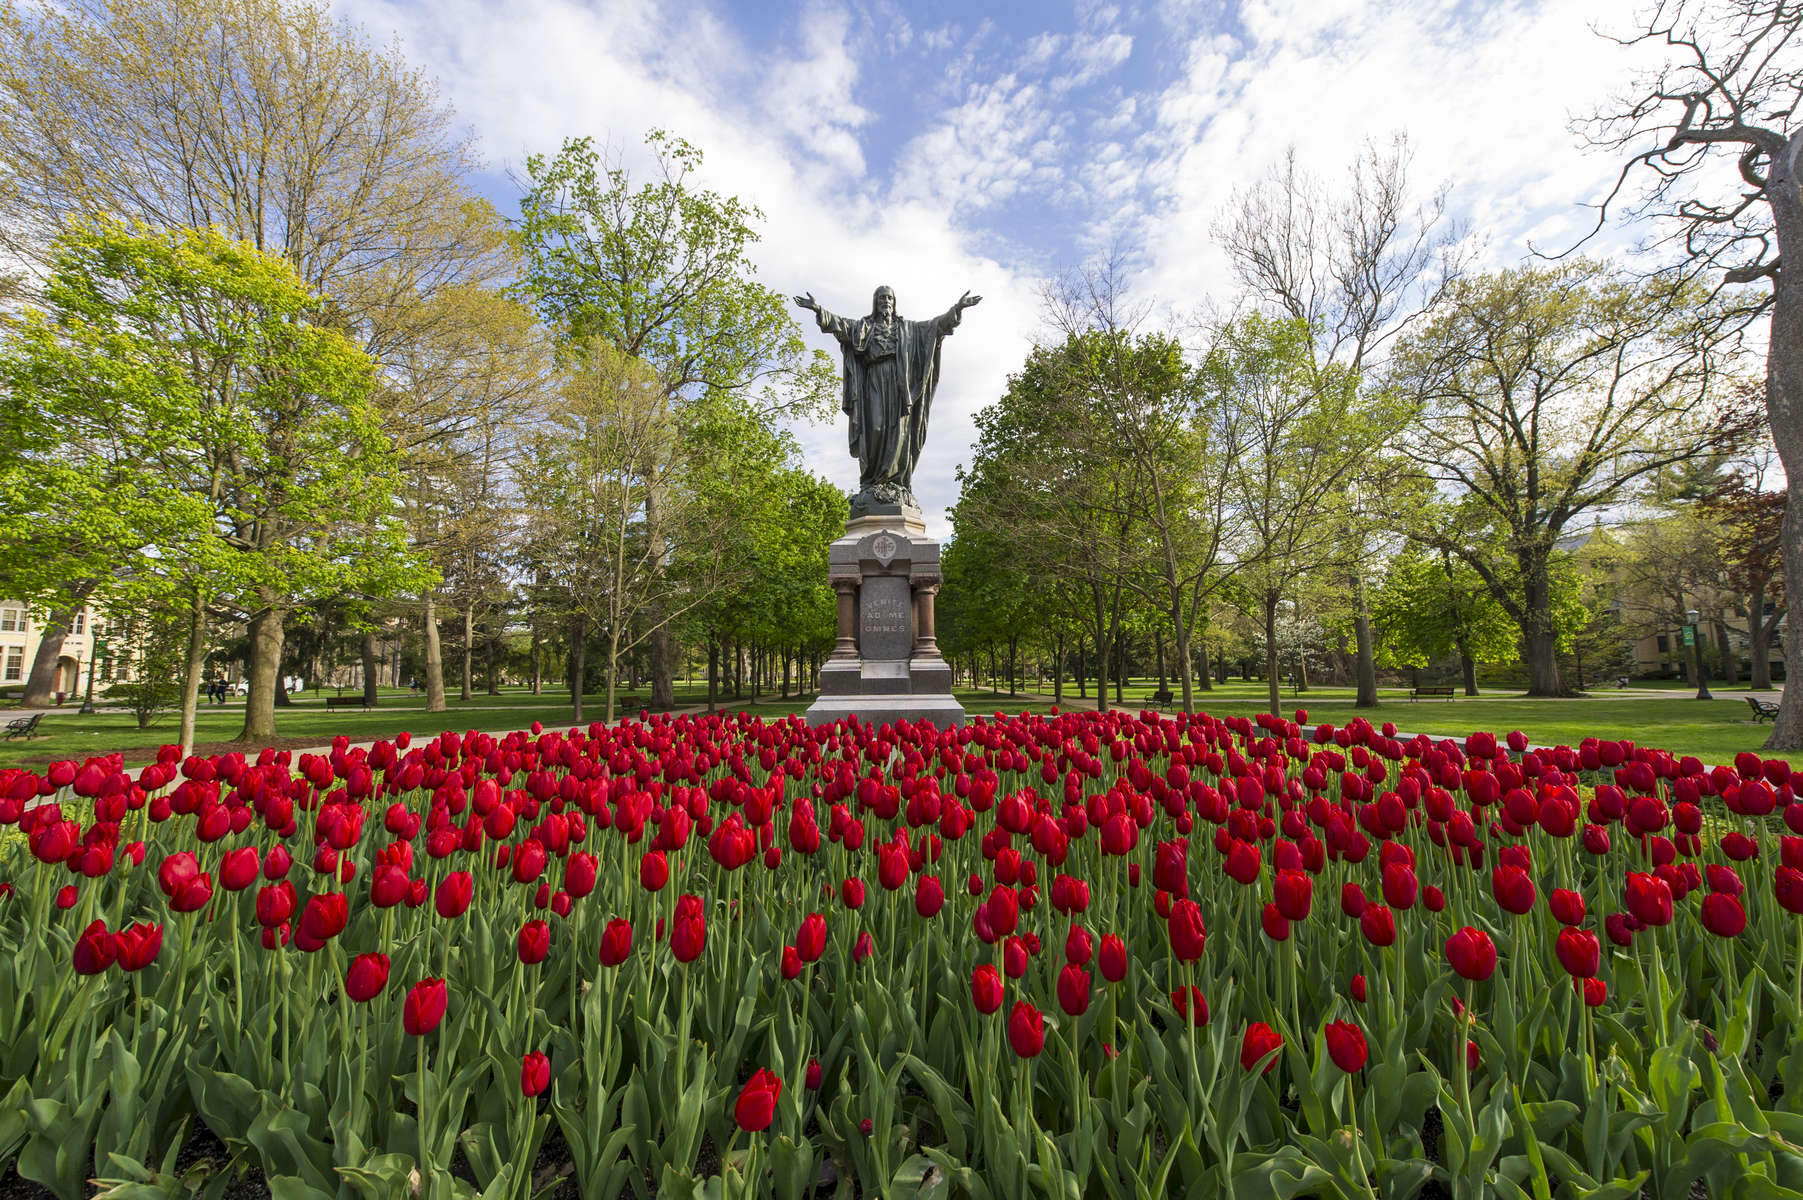 May 5, 2016; Tulips in full bloom in front of the Sacred Heart Jesus statue. (Photo by Barbara Johnston/University of Notre Dame)